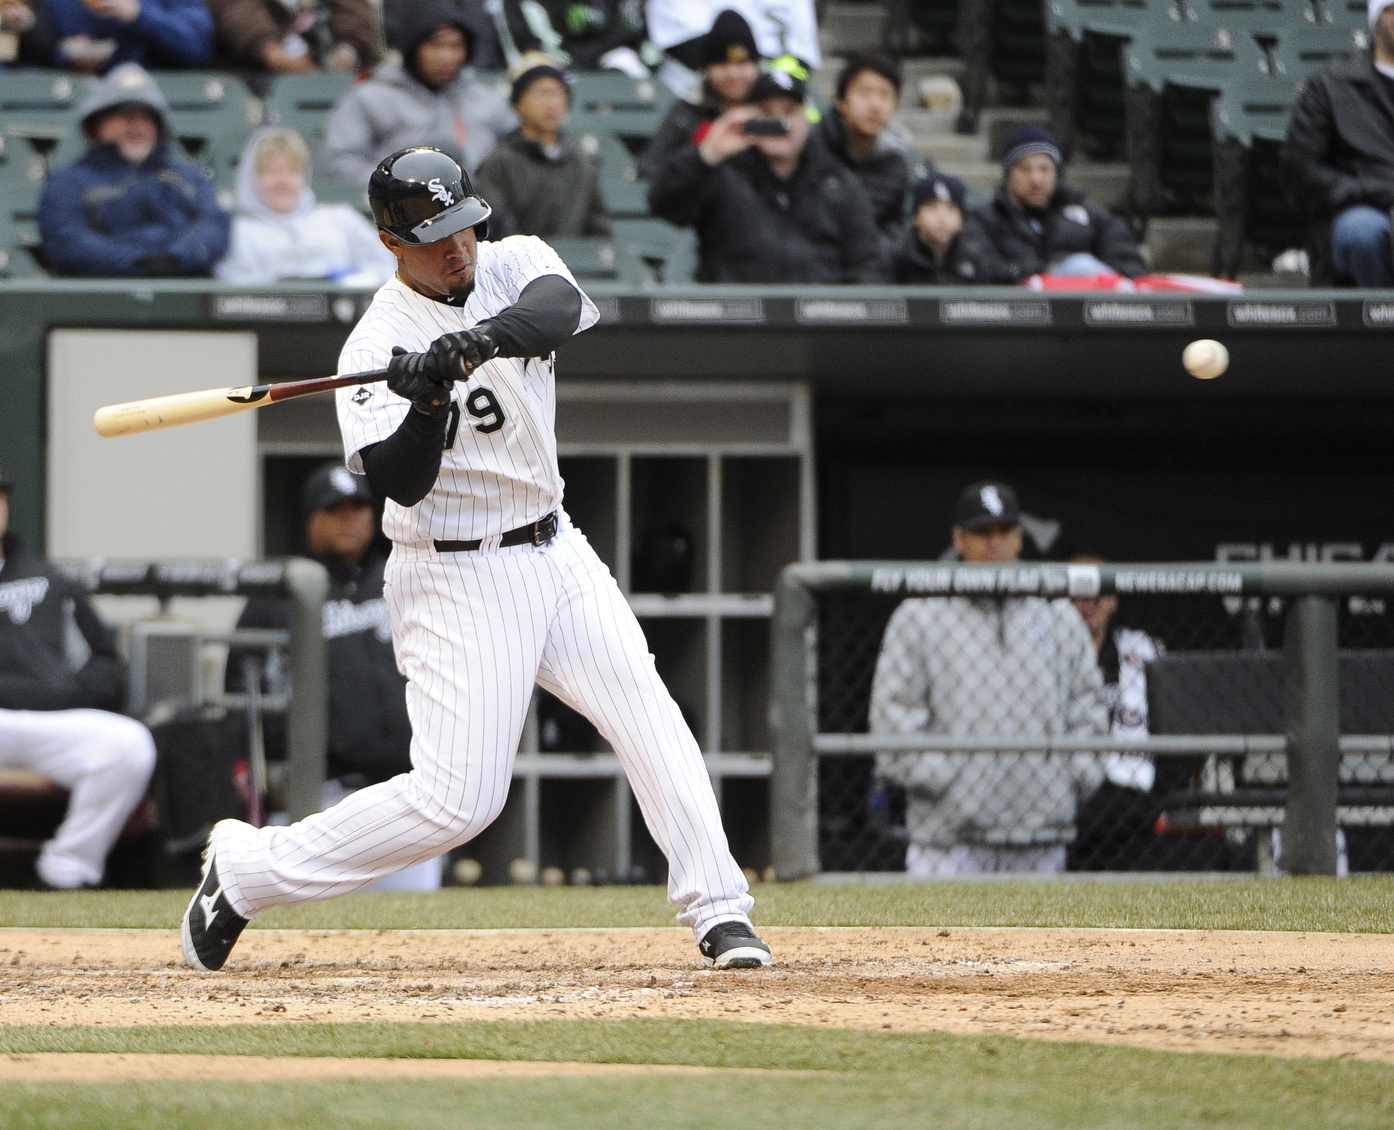 Jose Abreu squares up a pitch. Photo by David Banks, USA Today Sports Images.